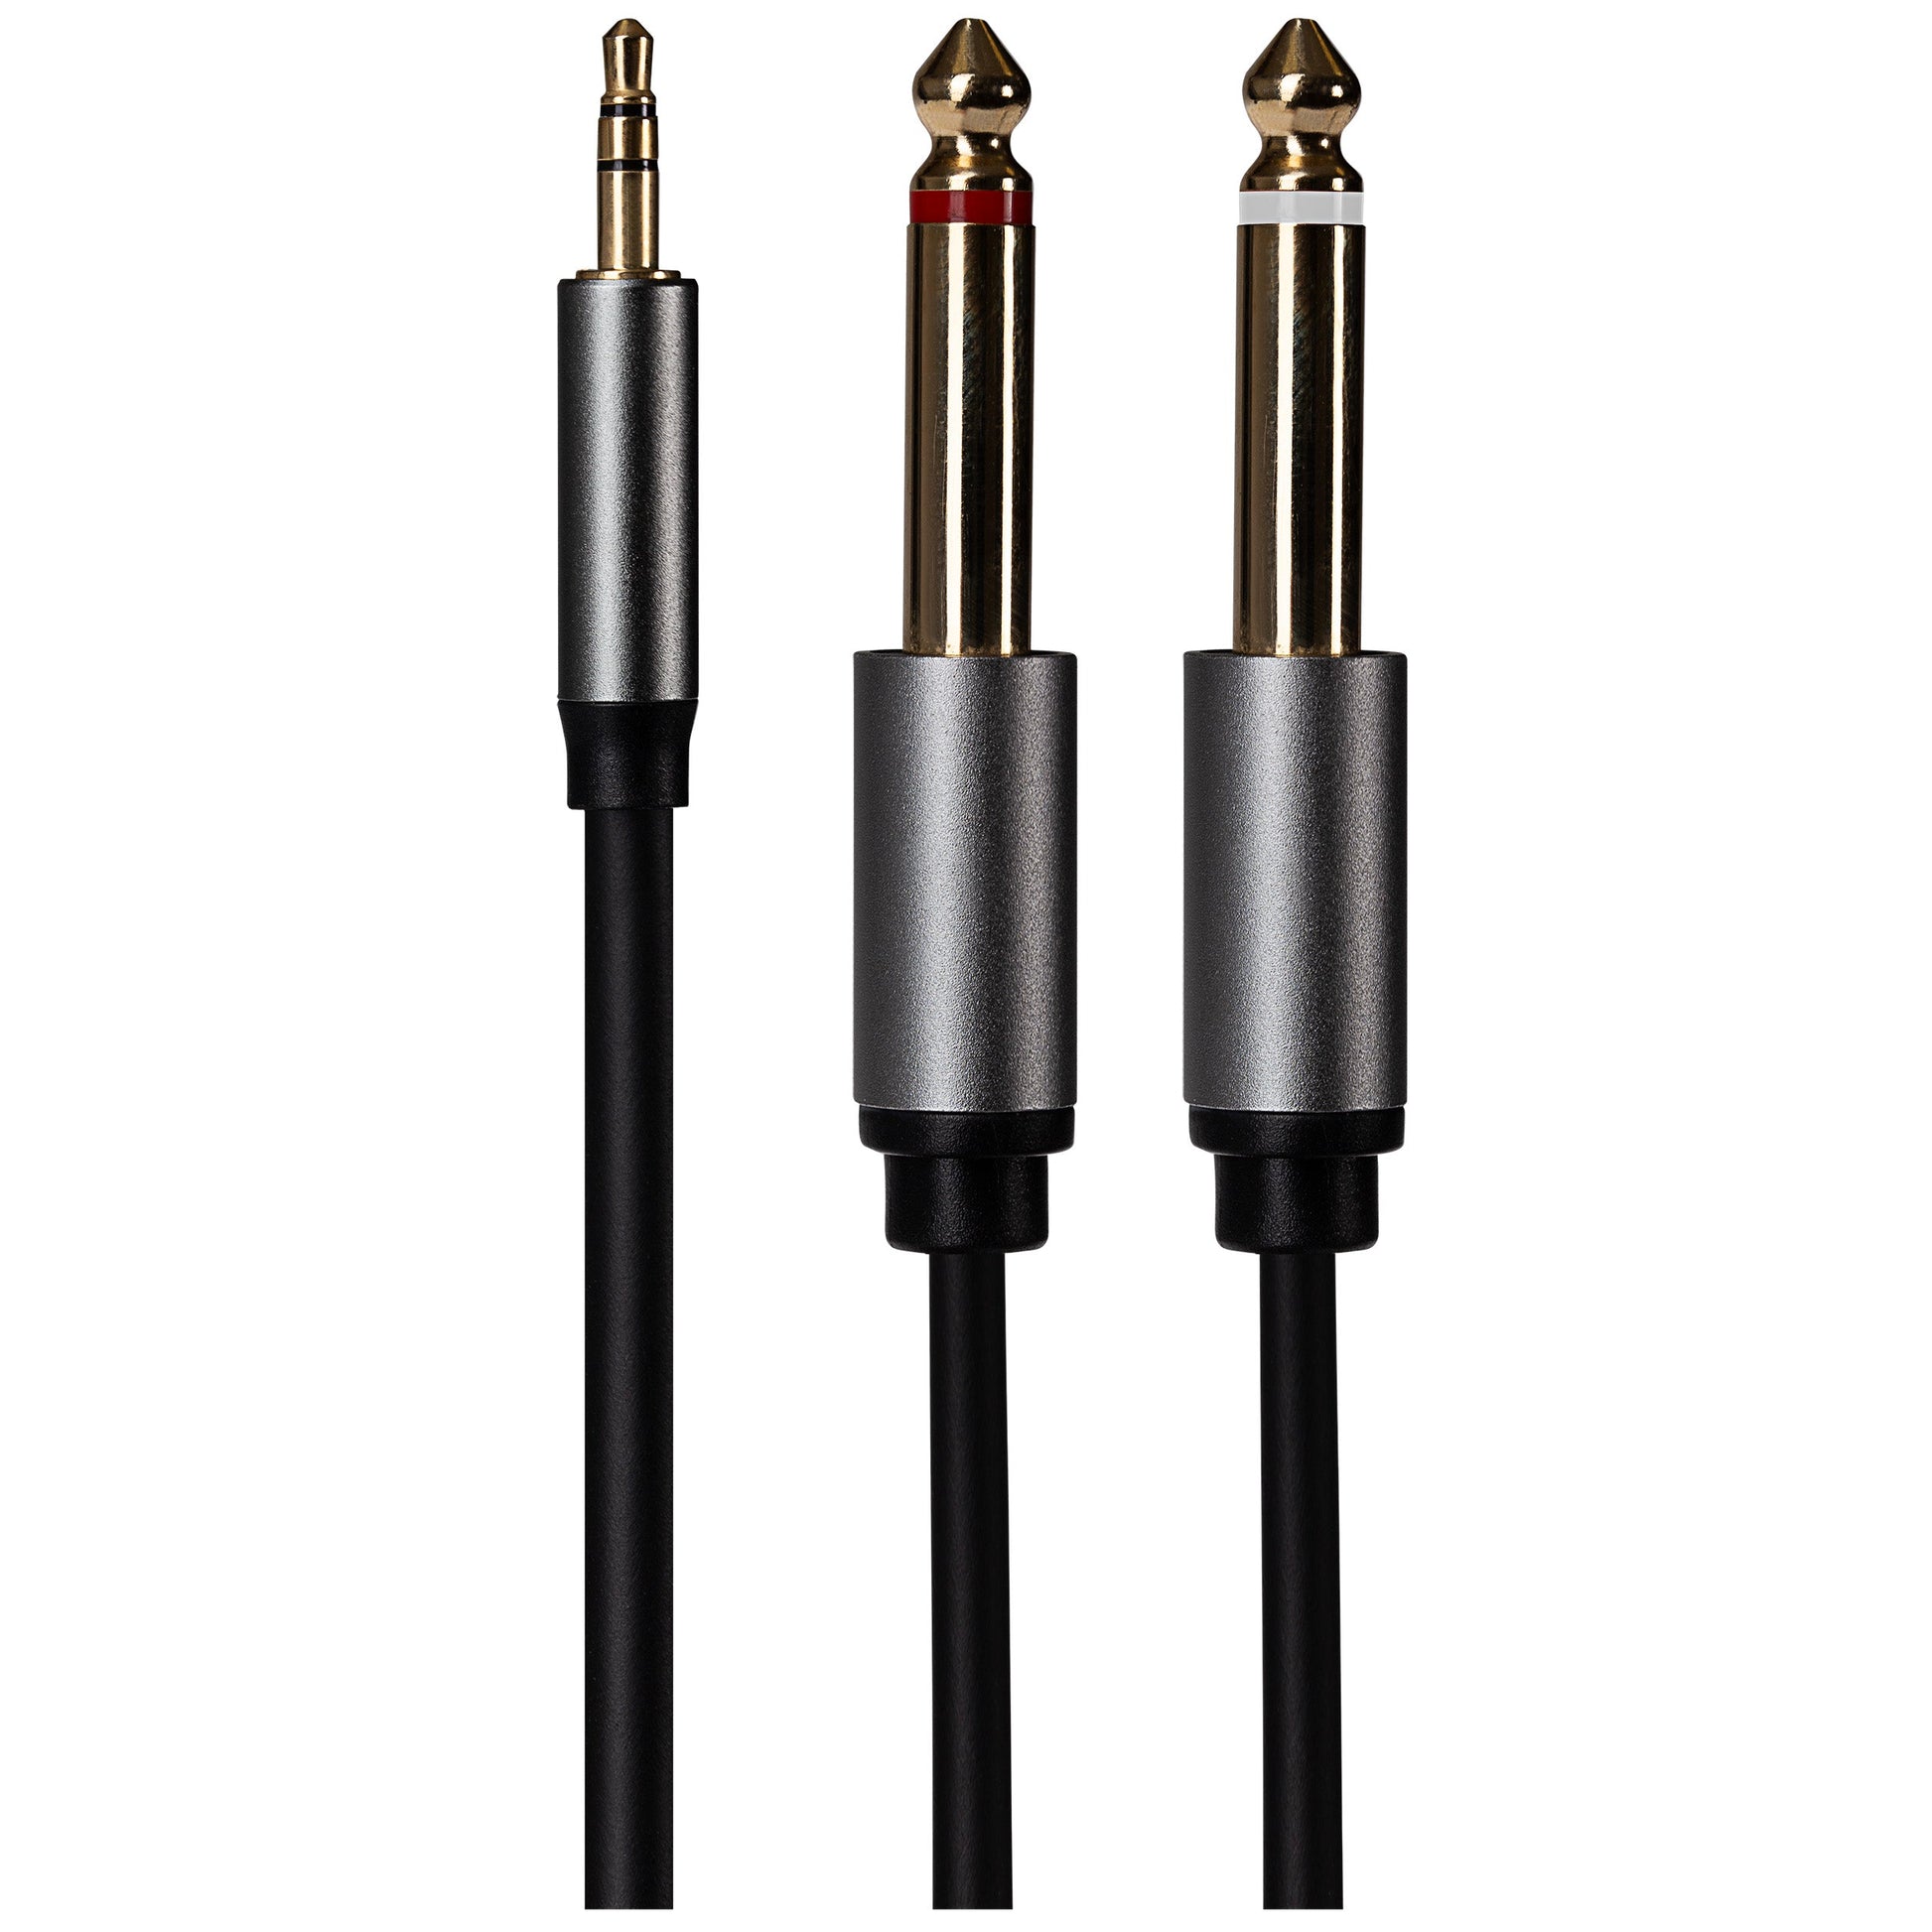 ProSound 3.5mm Stereo Jack to Twin 1/4 Mono Jack Cable - Black